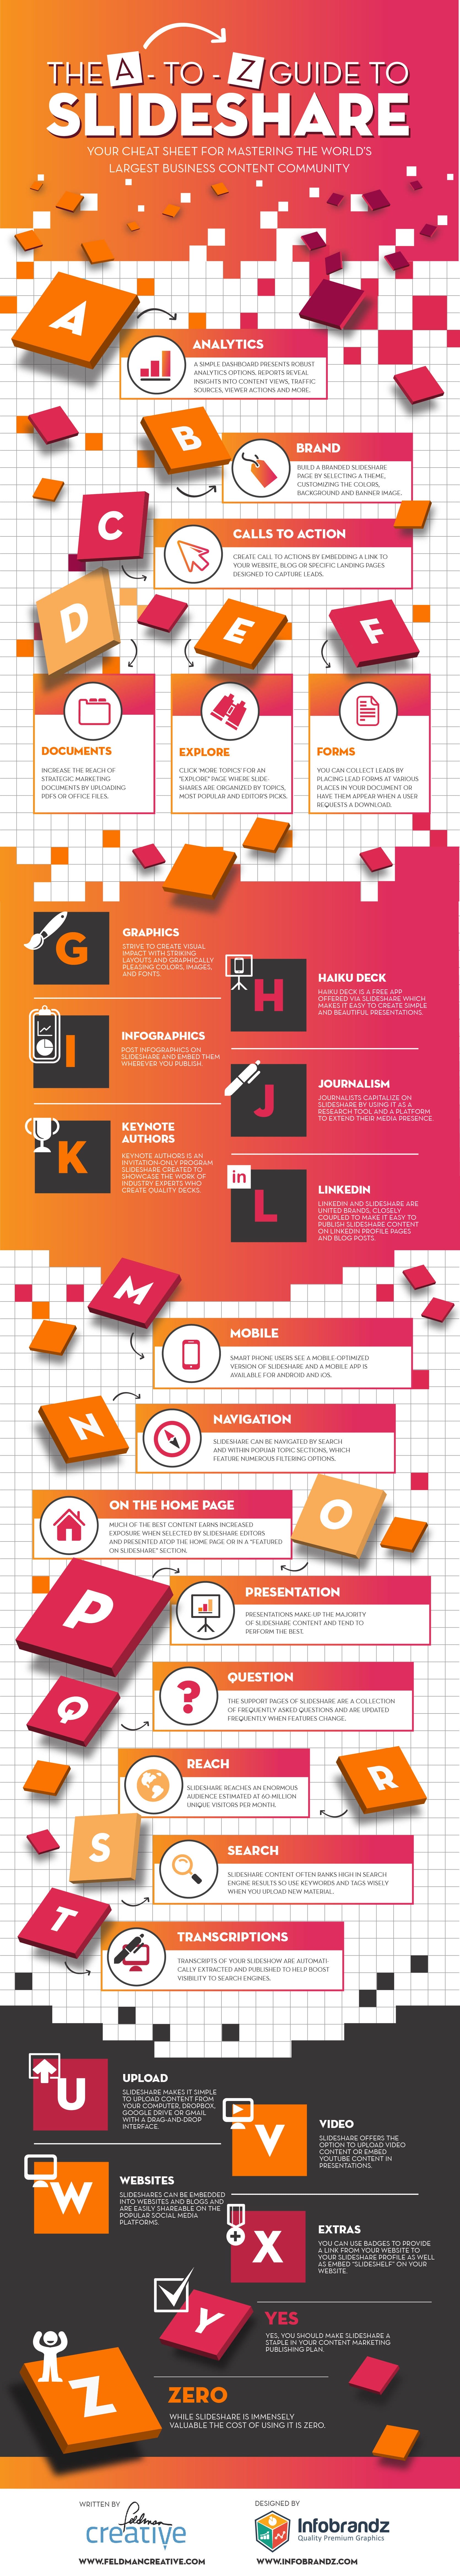 slideshare,infographic,infographic design agency,content marketing design agency